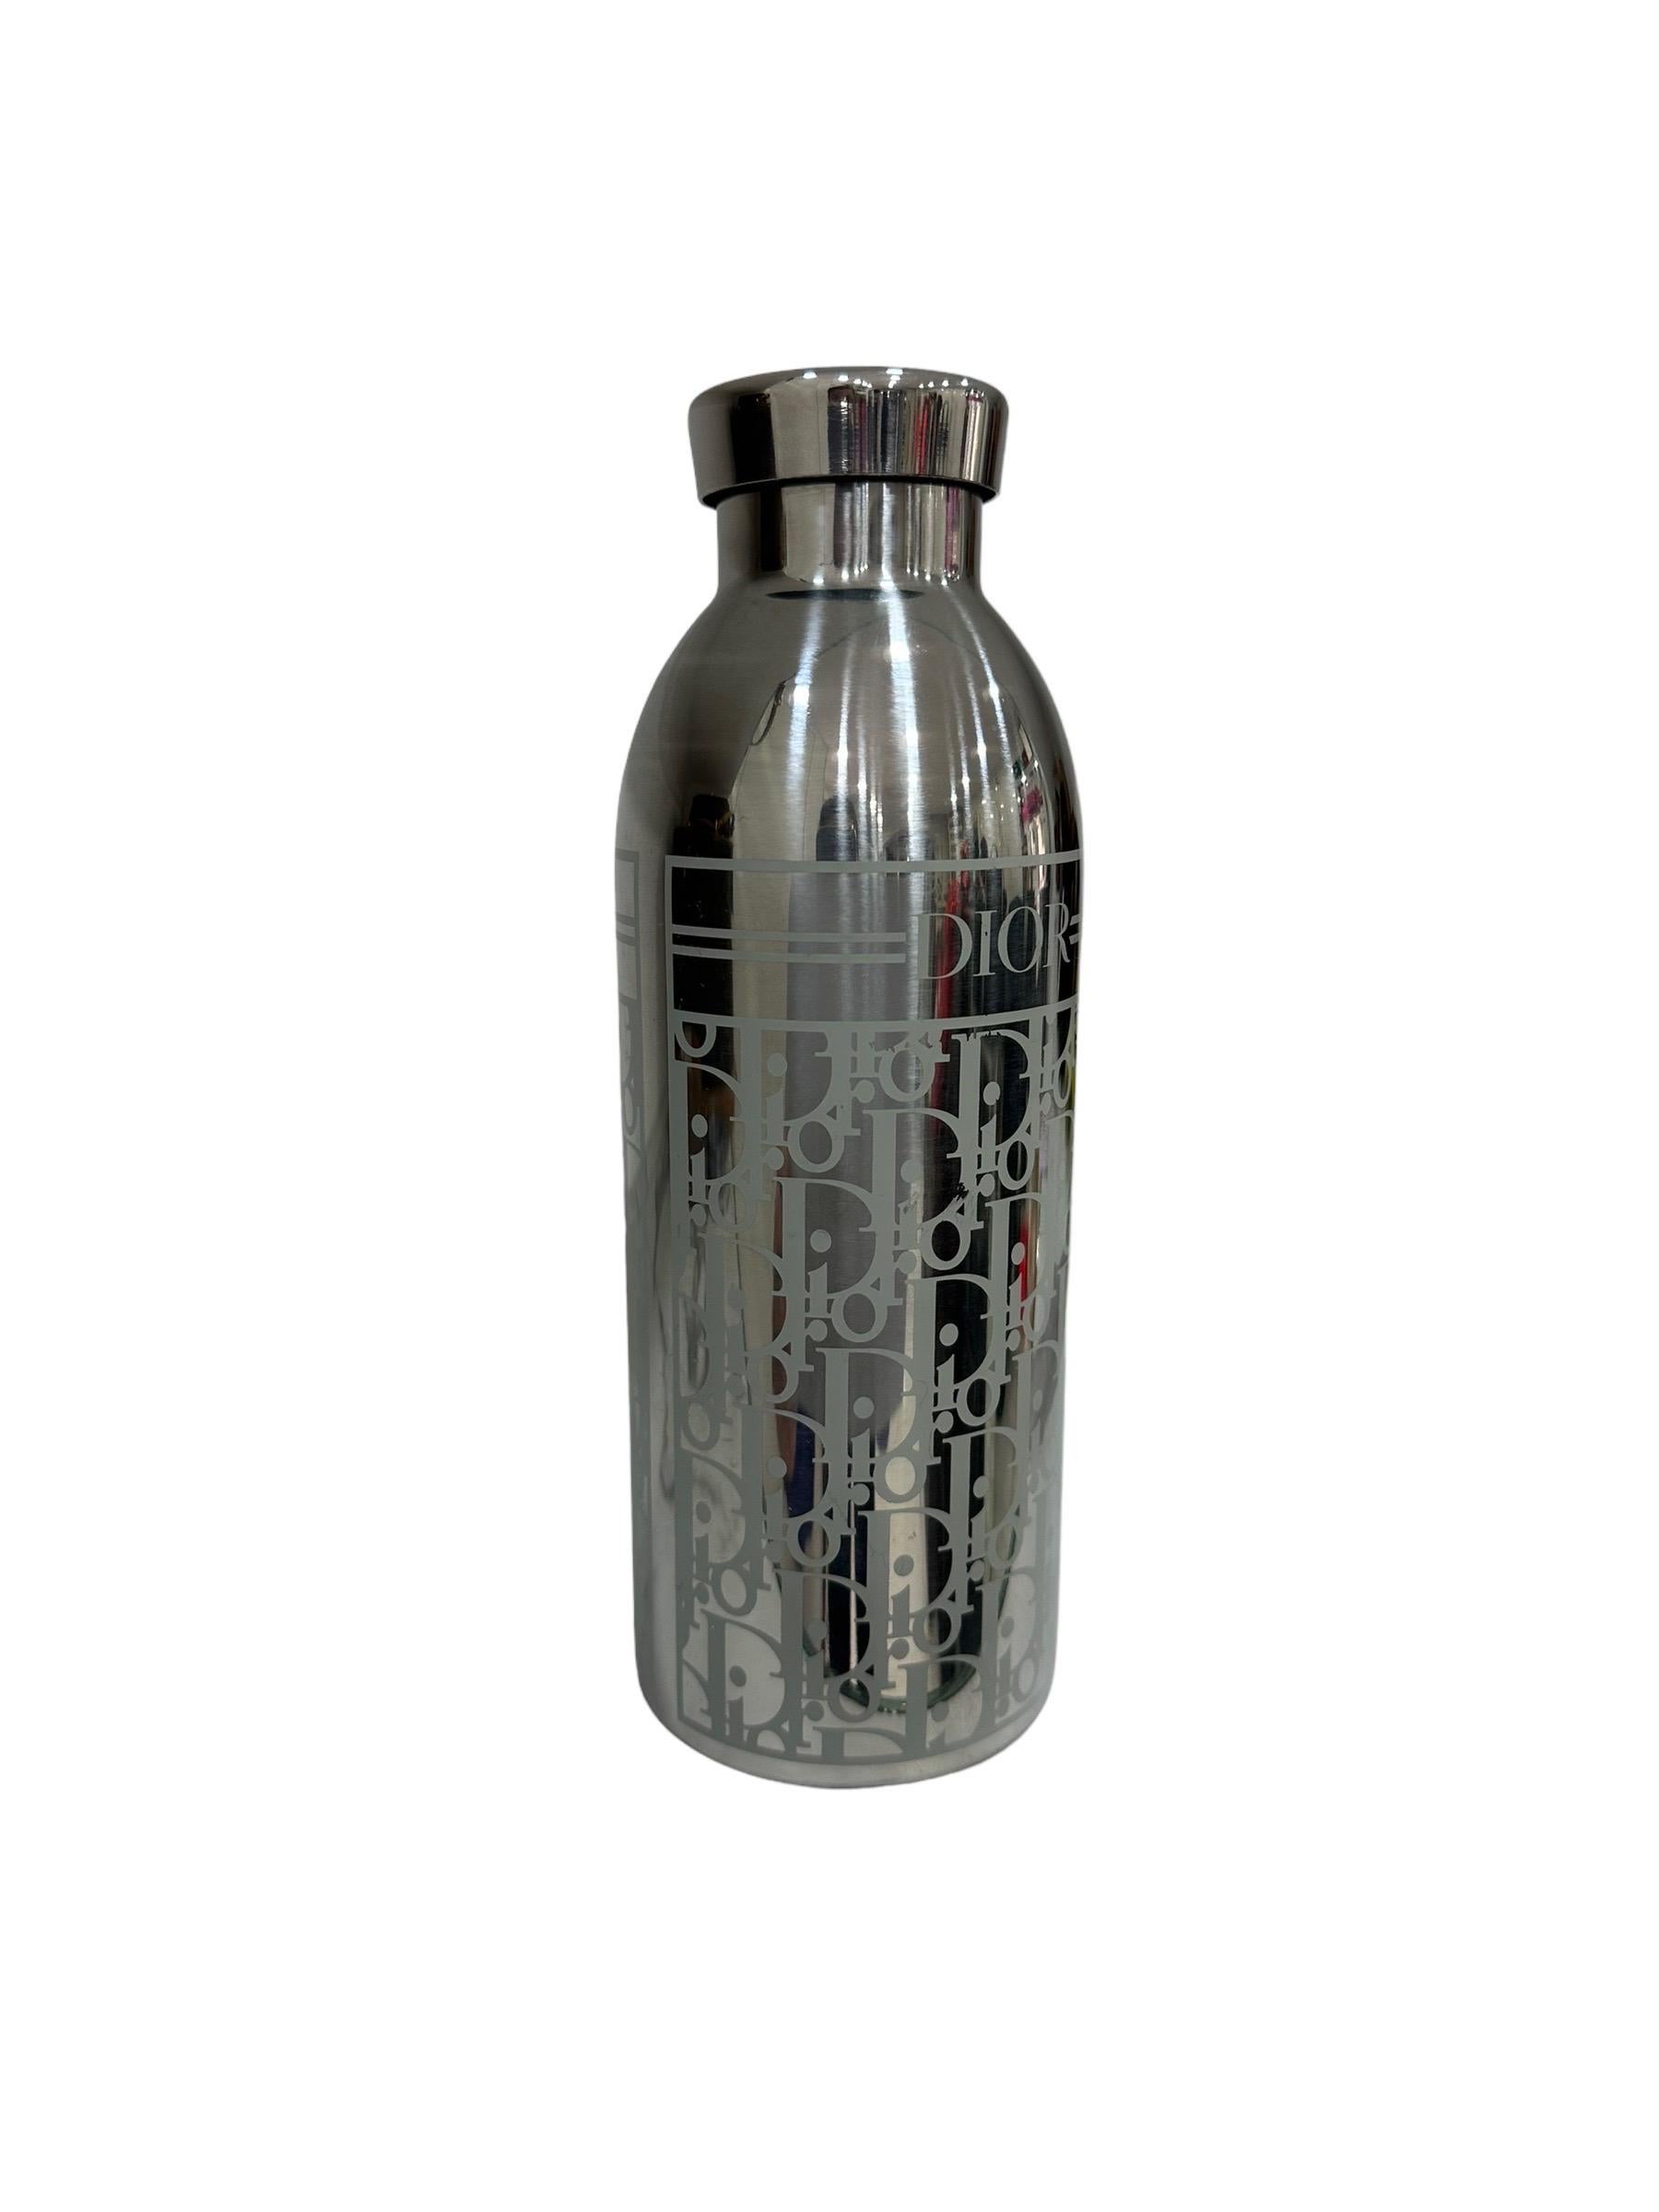 Dior signed bottle, made of silver-colored stainless steel with oblique white jacquard pattern. Equipped with a special isothermal technology that keeps drinks hot for 12 hours and cold for 24. It is in excellent condition.